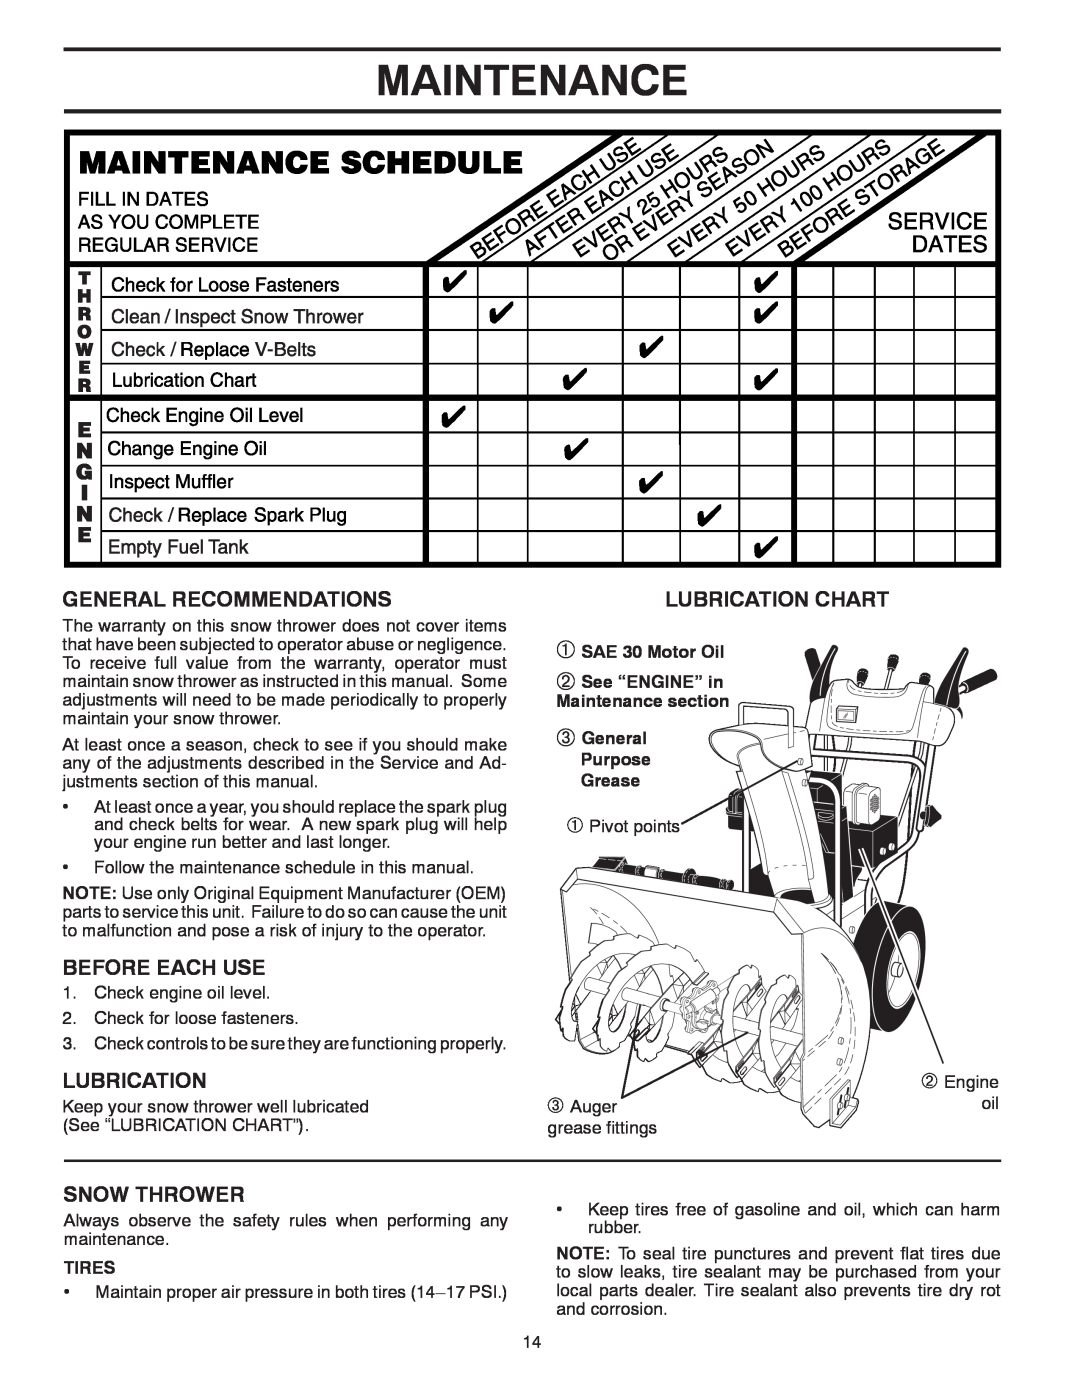 Poulan PP208EPS24 Maintenance, General Recommendations, Before Each Use, Snow Thrower, Lubrication Chart, Tires 